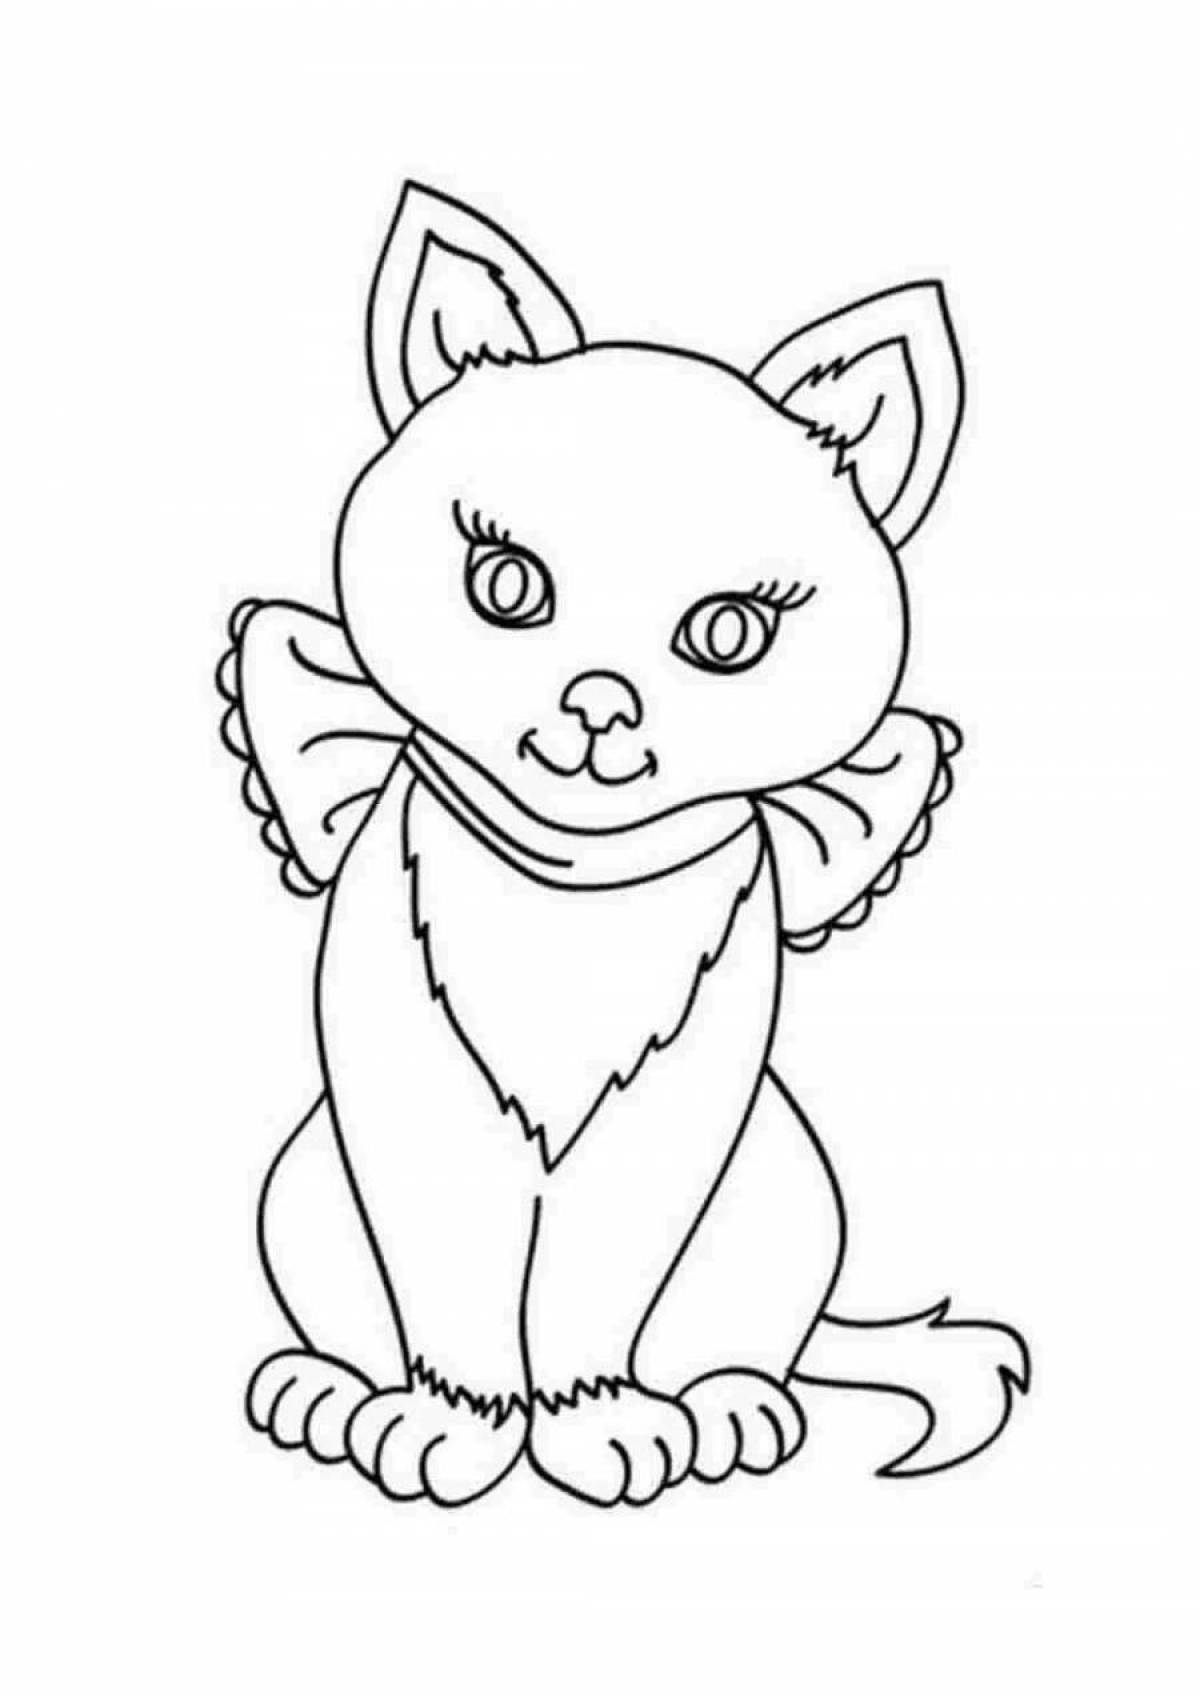 Radiant animal coloring book for girls